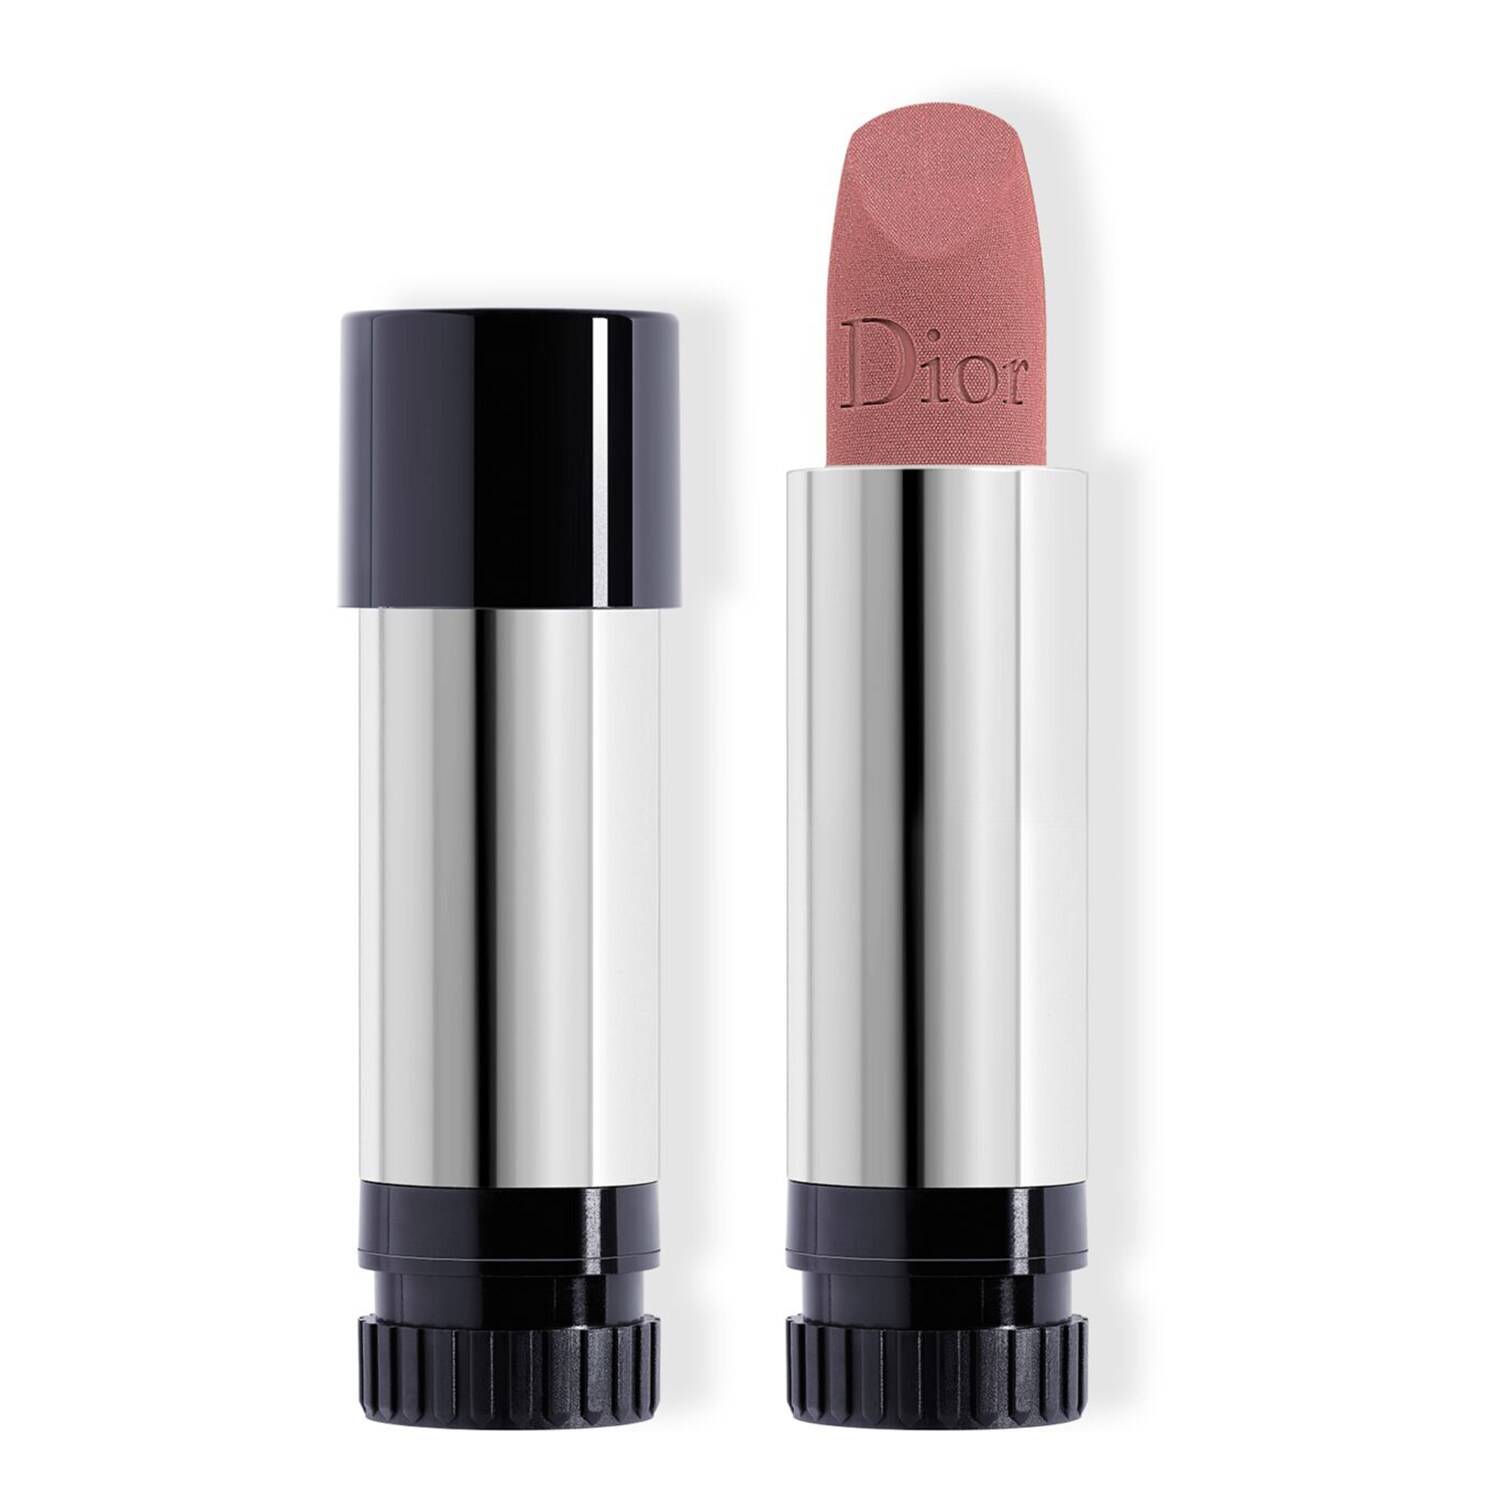 Dior Rouge Dior Couture Colour Lipstick Refill 3.5G 100 Nude Look Extra Matte Finish